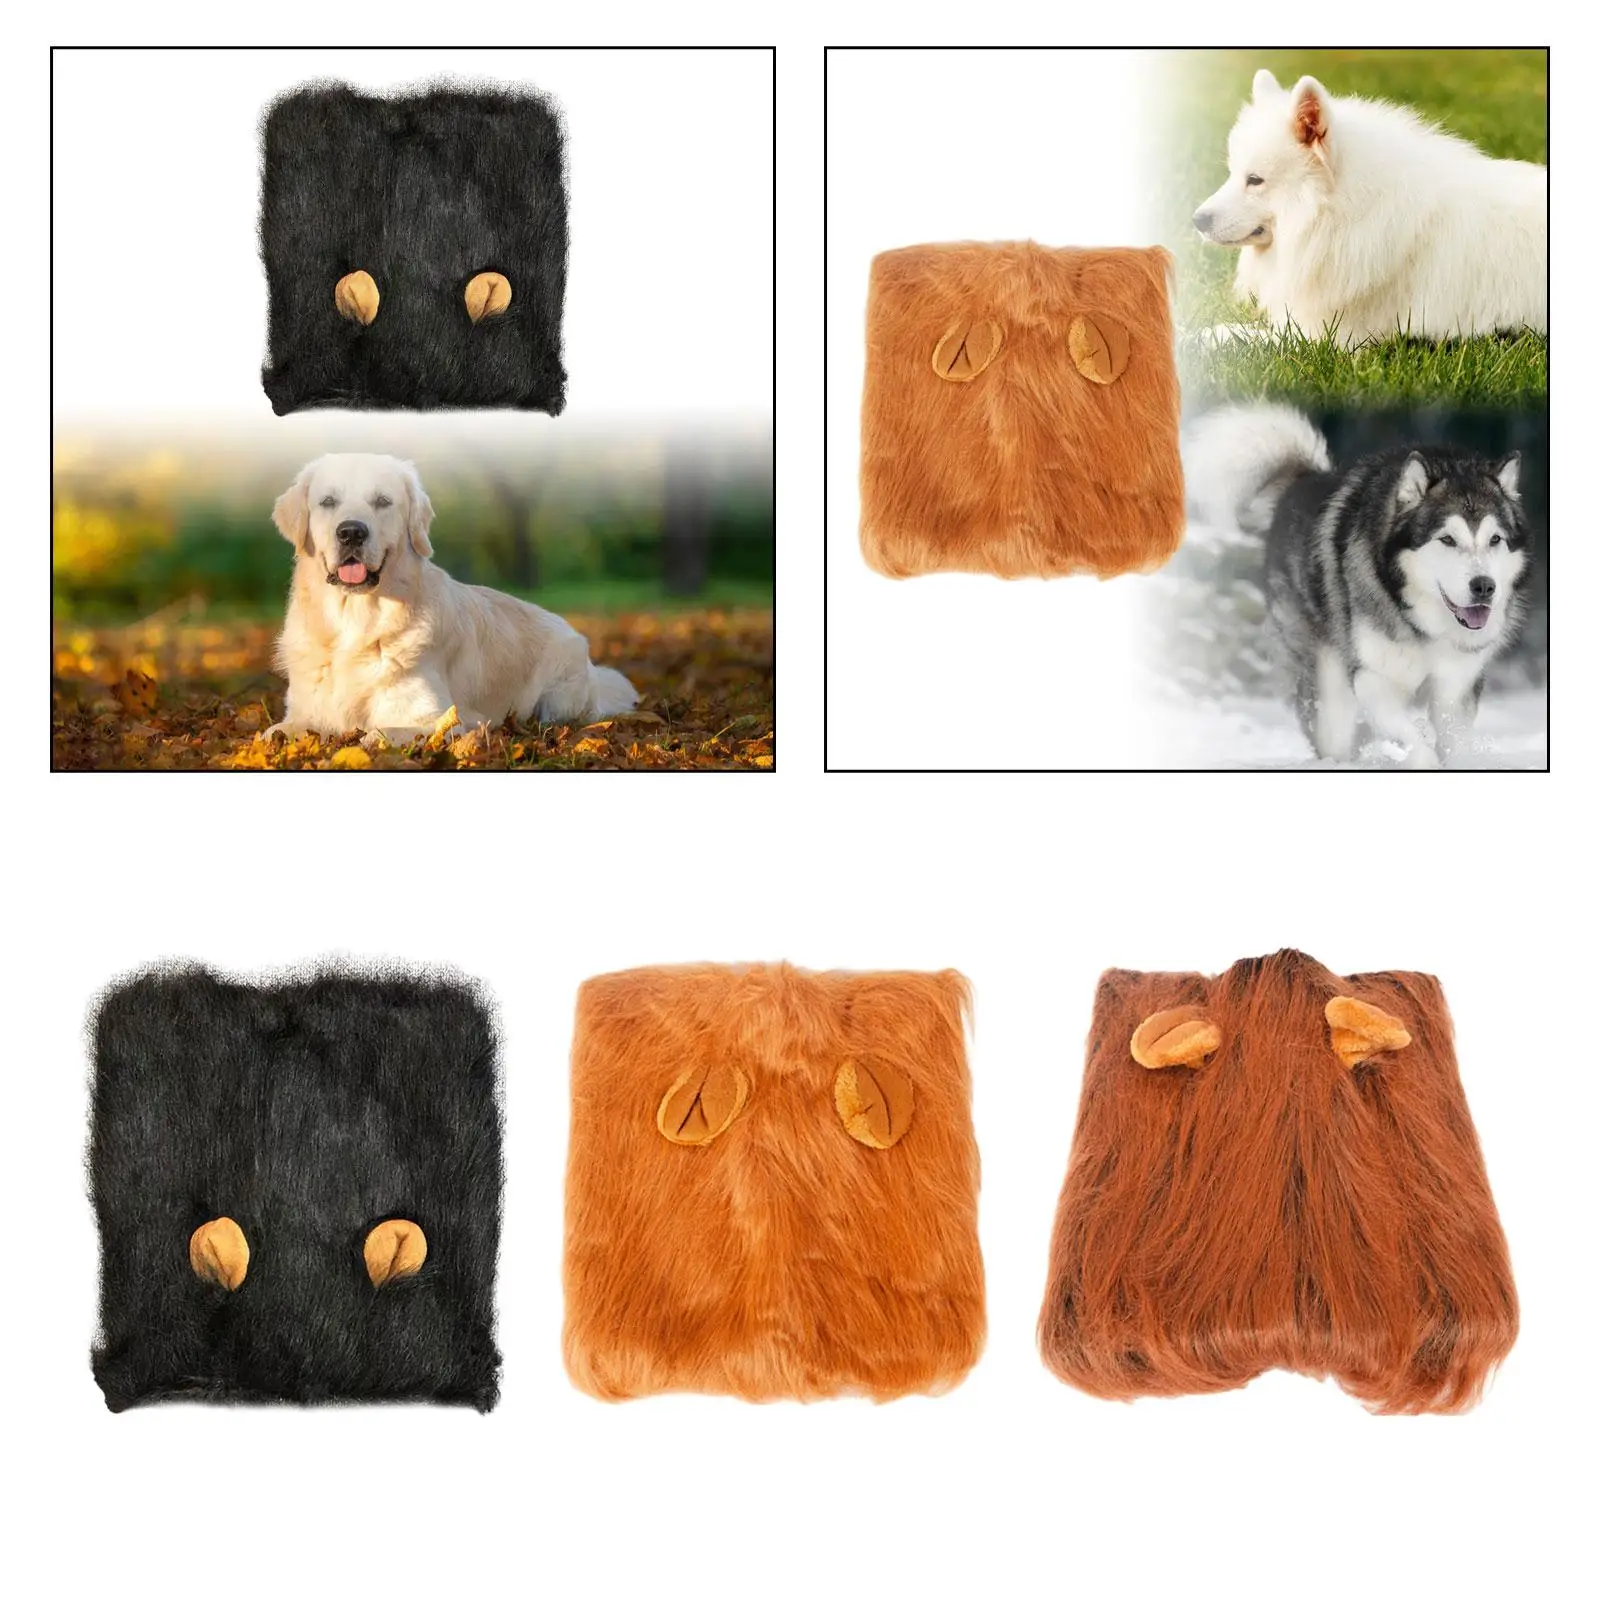 Mane for Cat Outfit Fashion Halloween Costume for Role Play Dogs Party